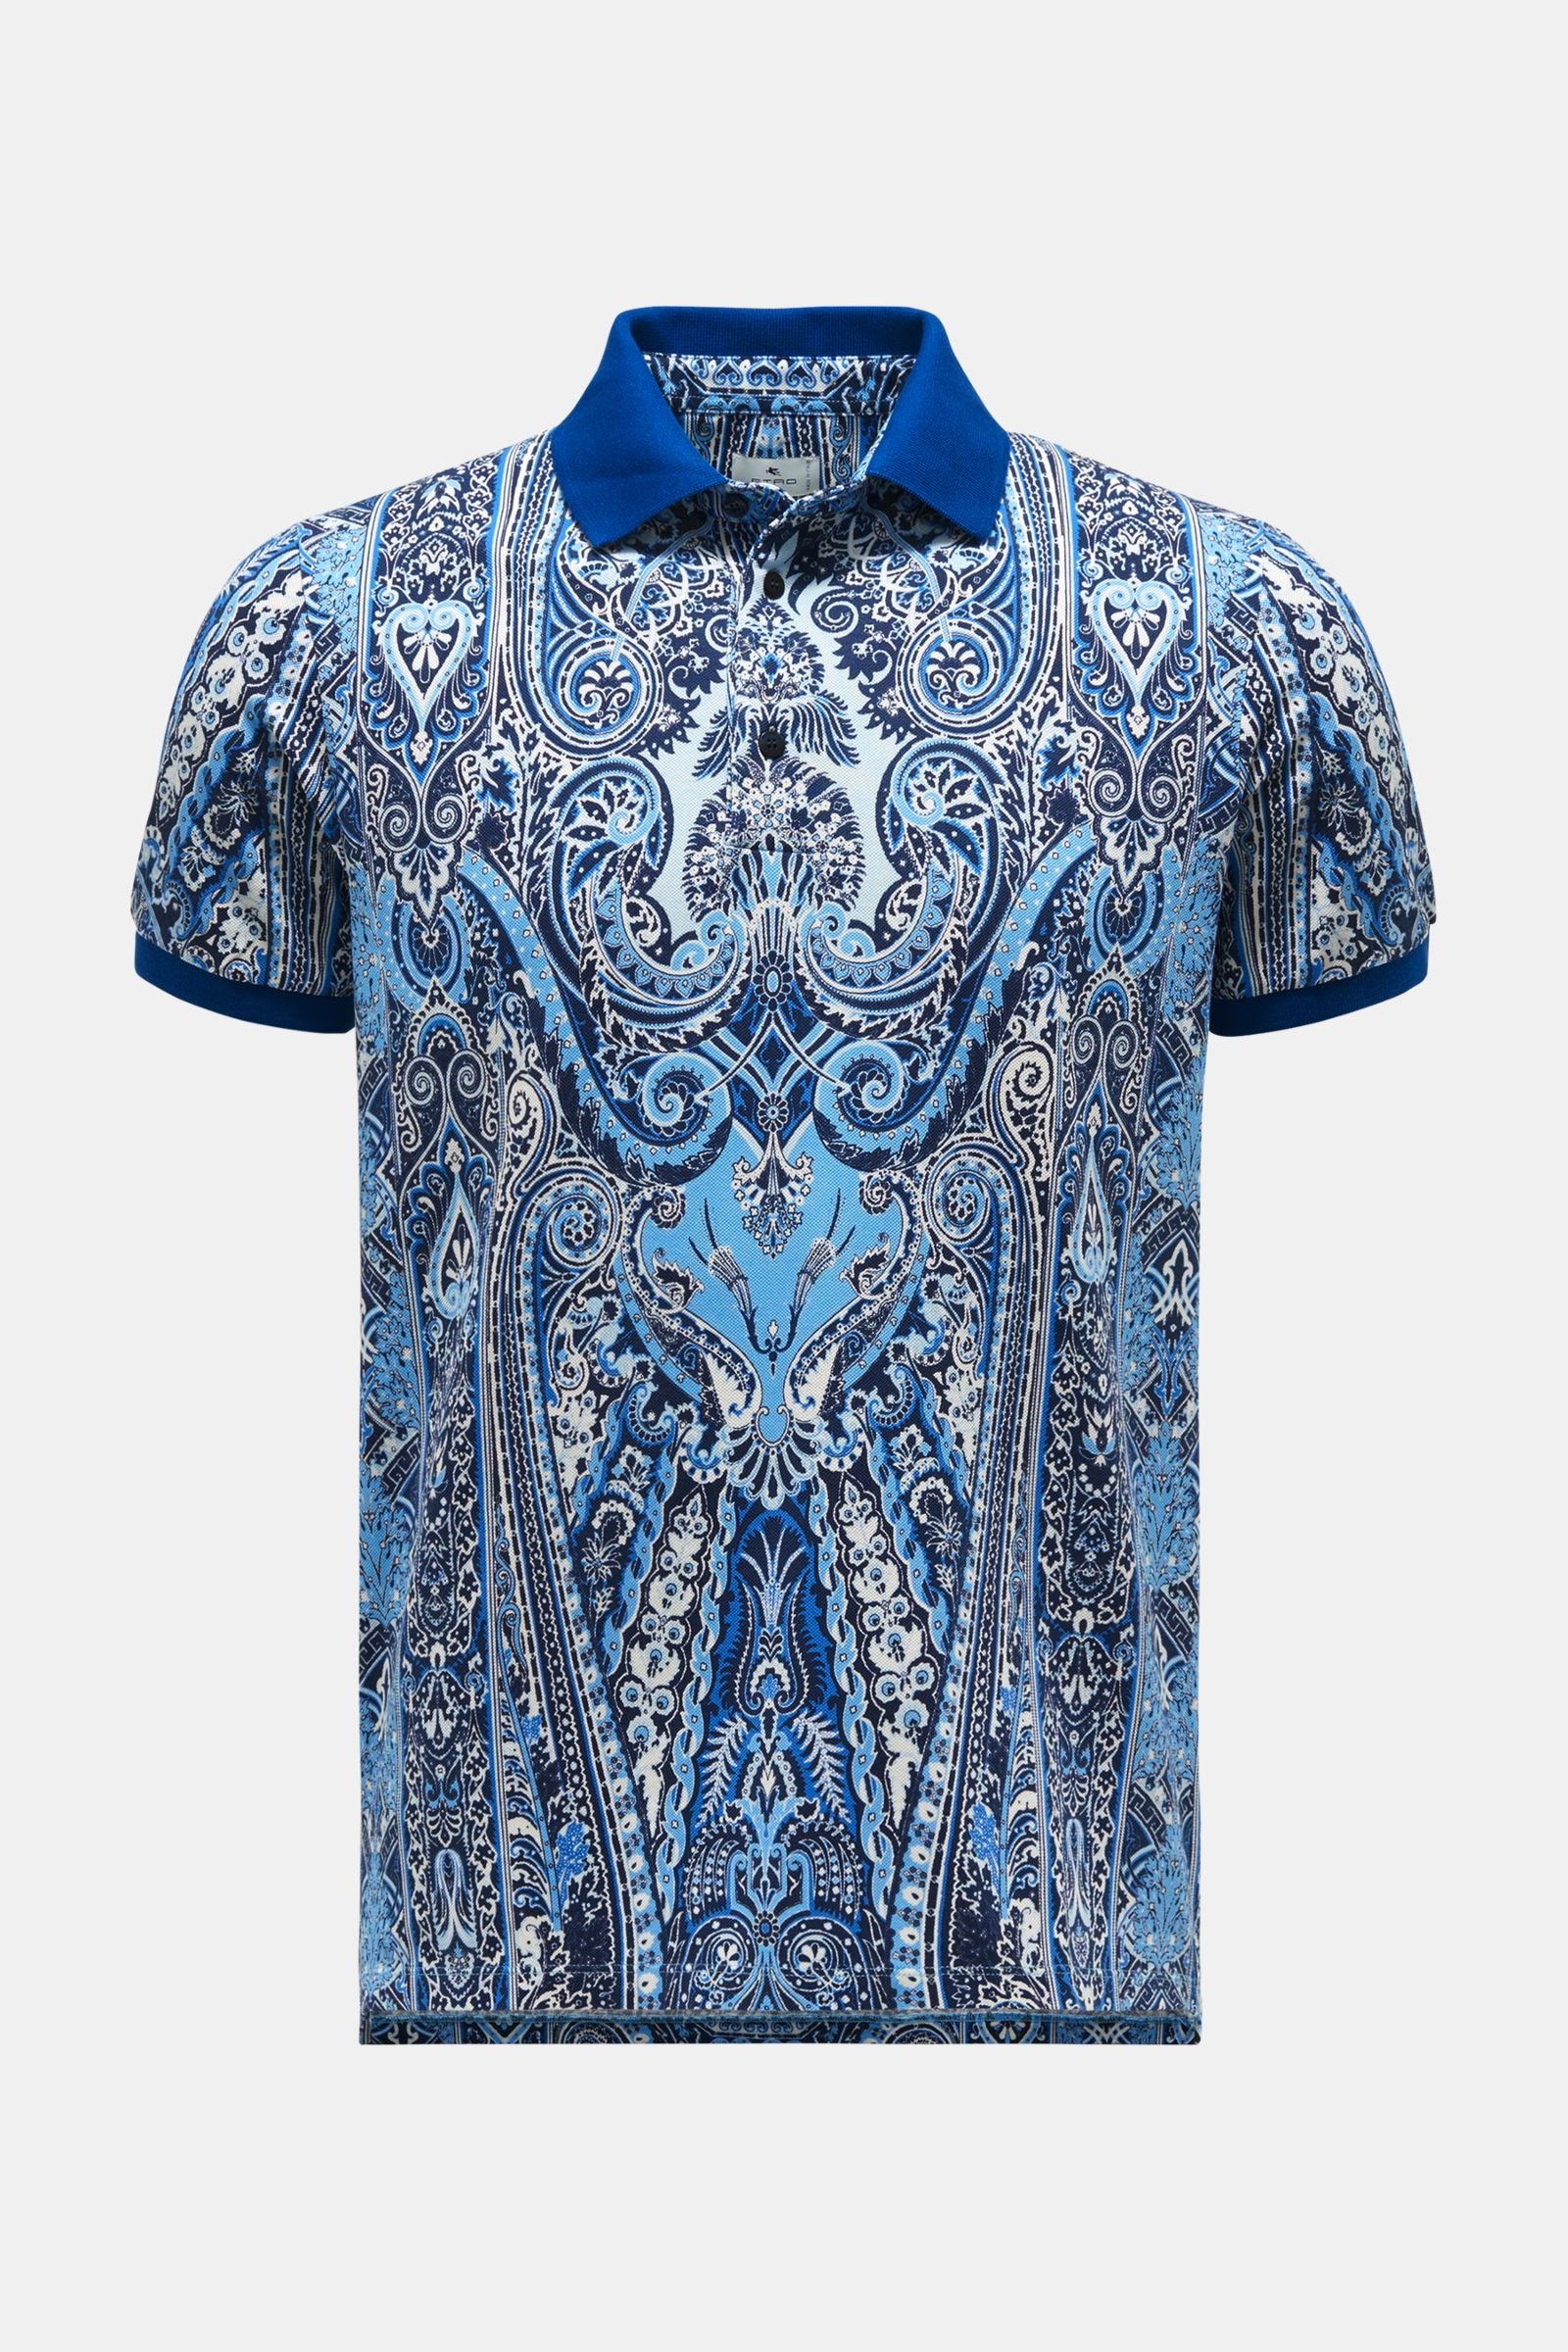 Polo shirt blue patterned